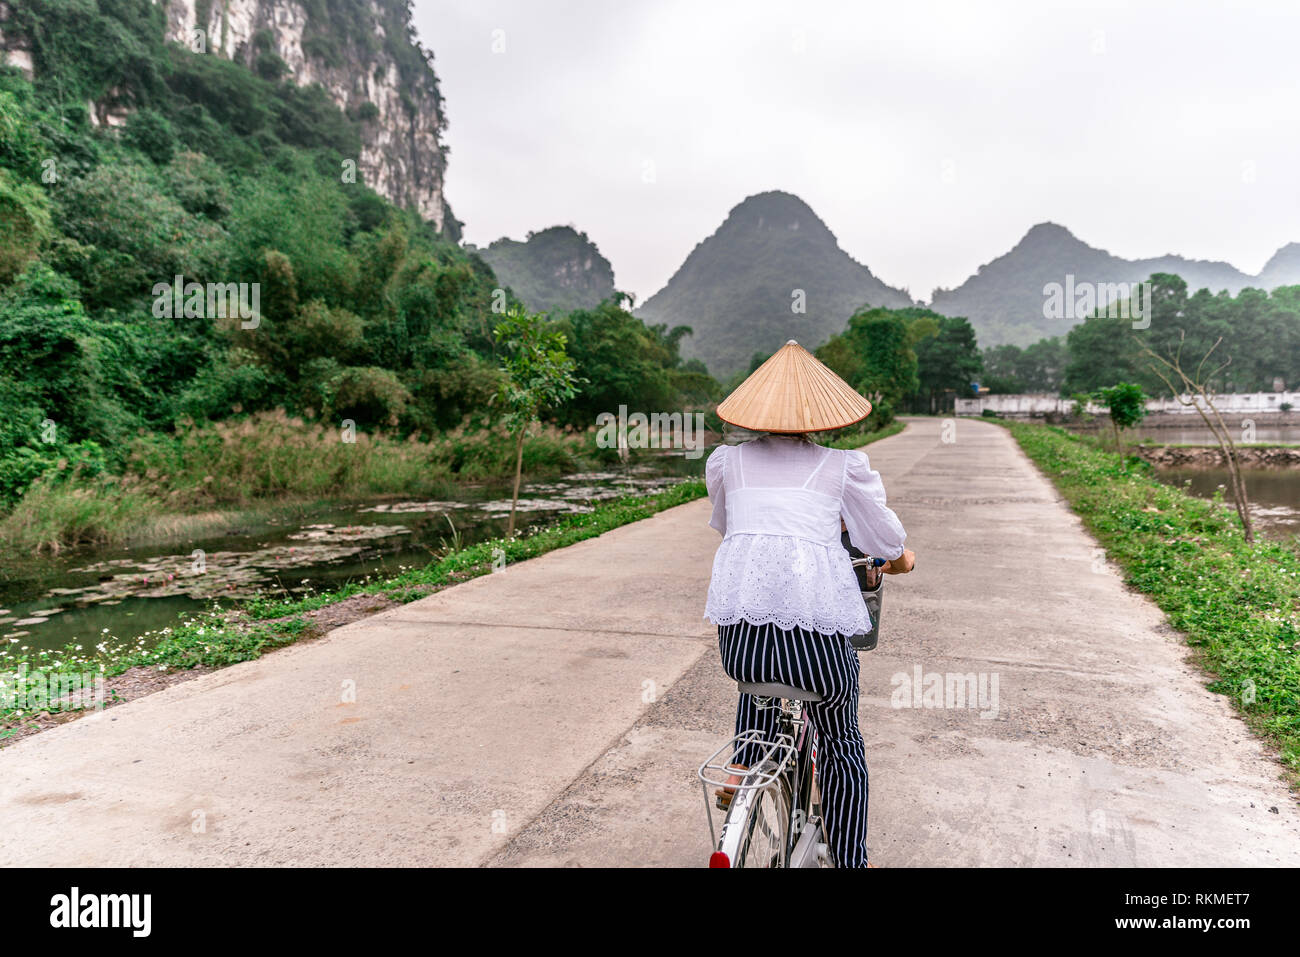 Vietnamese woman with traditional conical straw hat on bicycle. Beautiful Landscape of rice fields and mountain Scenery at Nature reserve Trang An and Stock Photo